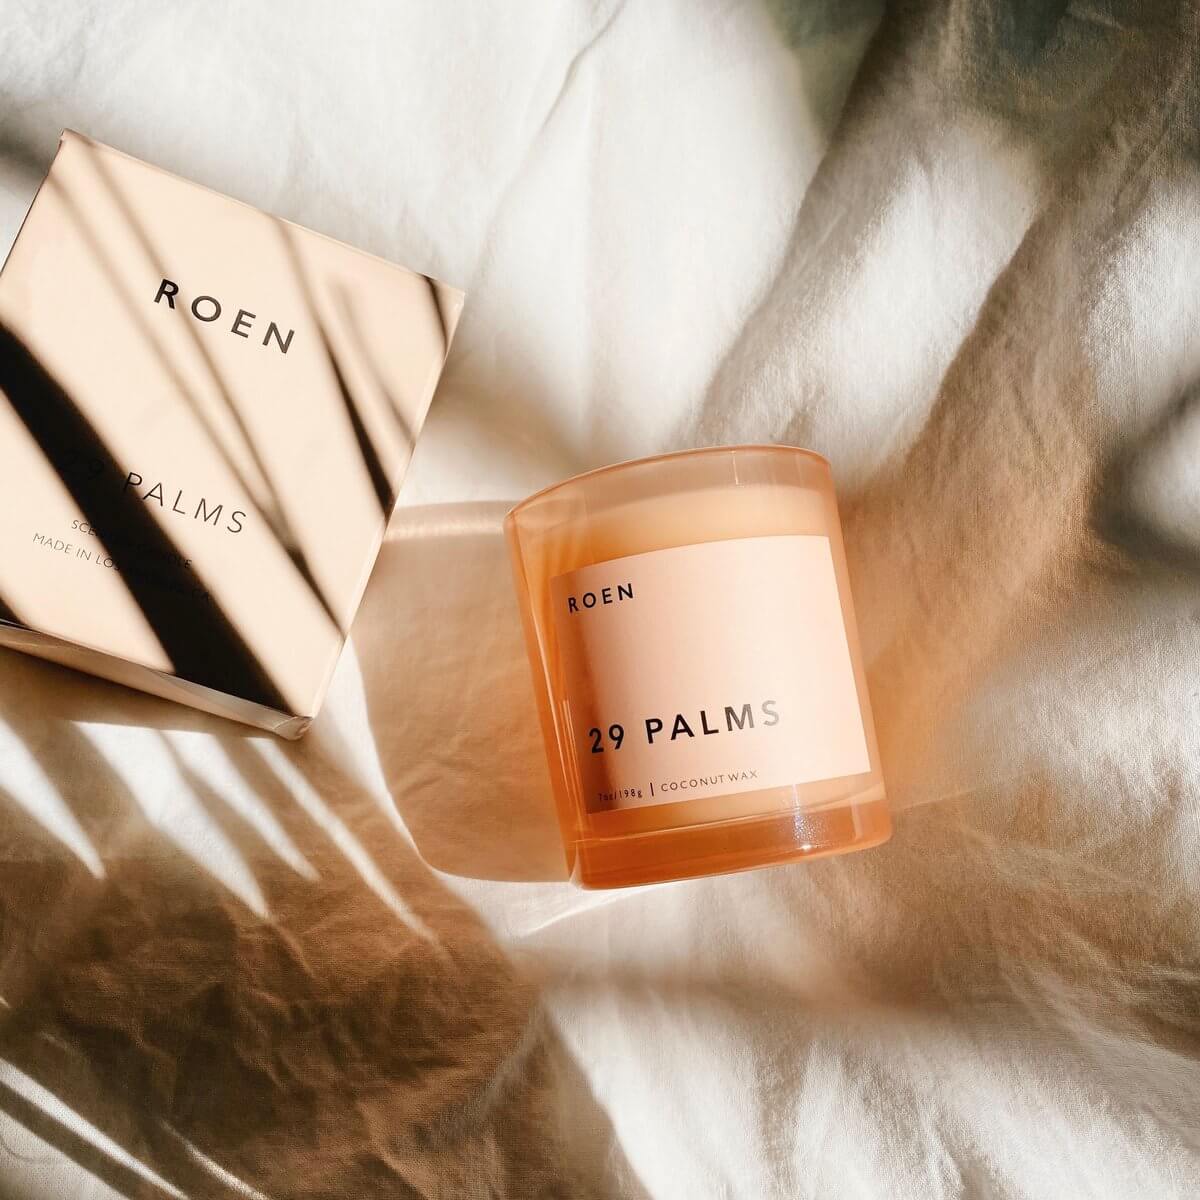 29 Palms Candle by R O E N